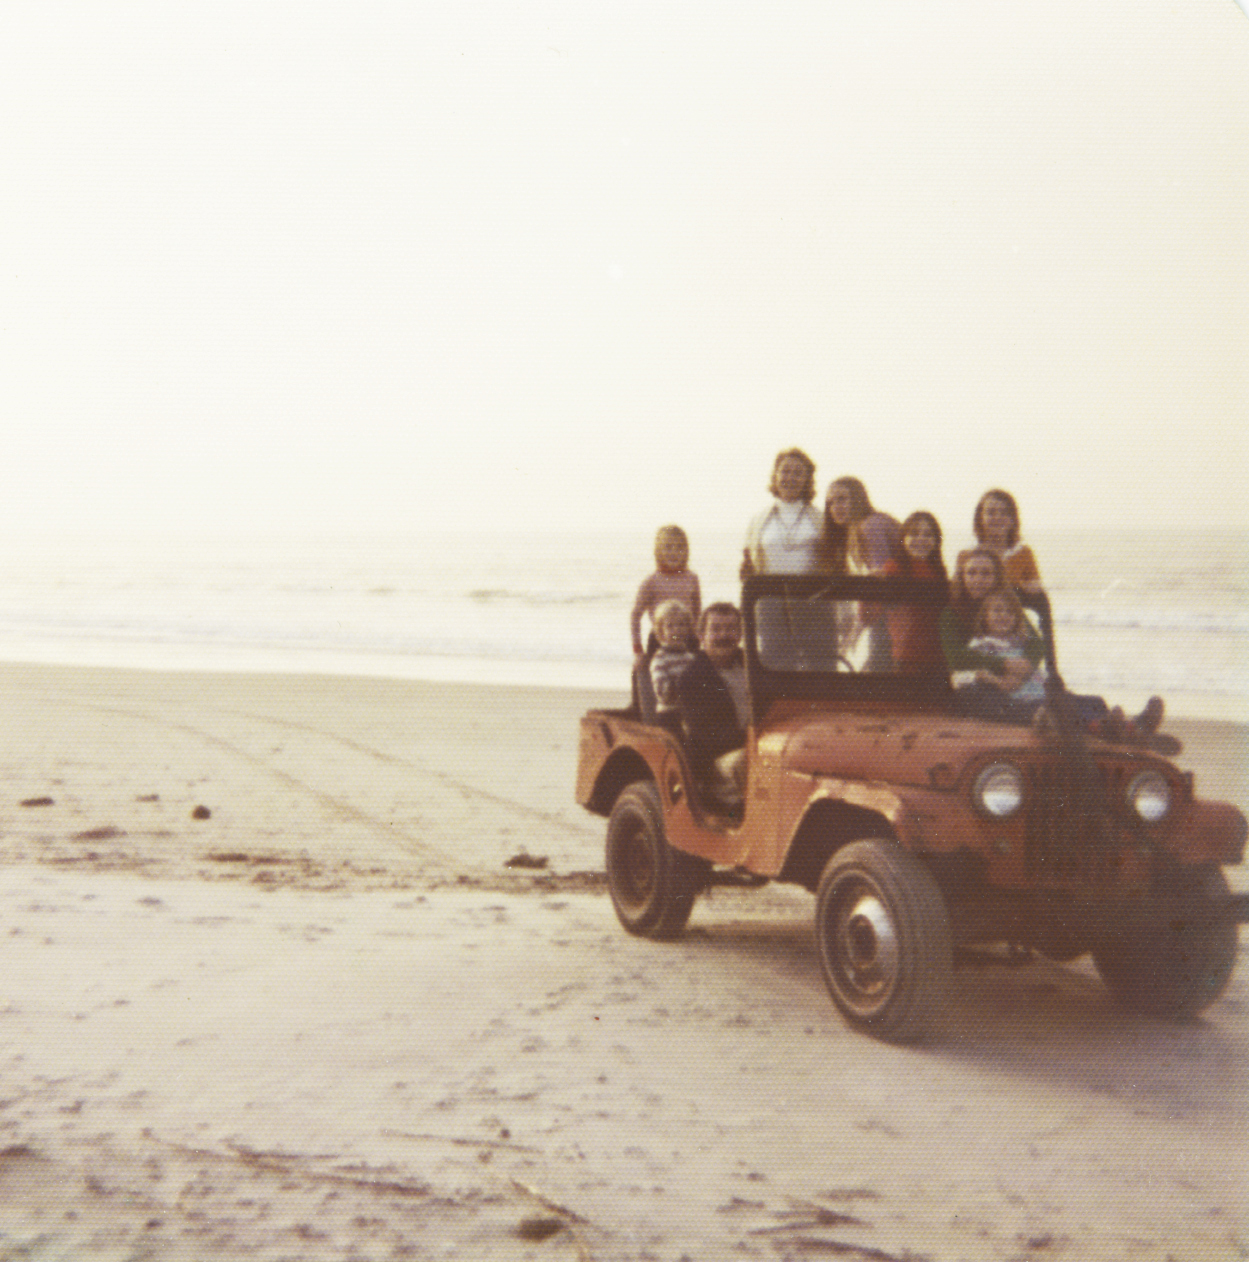 Marshall’s dad, Neil, drives the family on front beach jaunts in their Willys jeep.